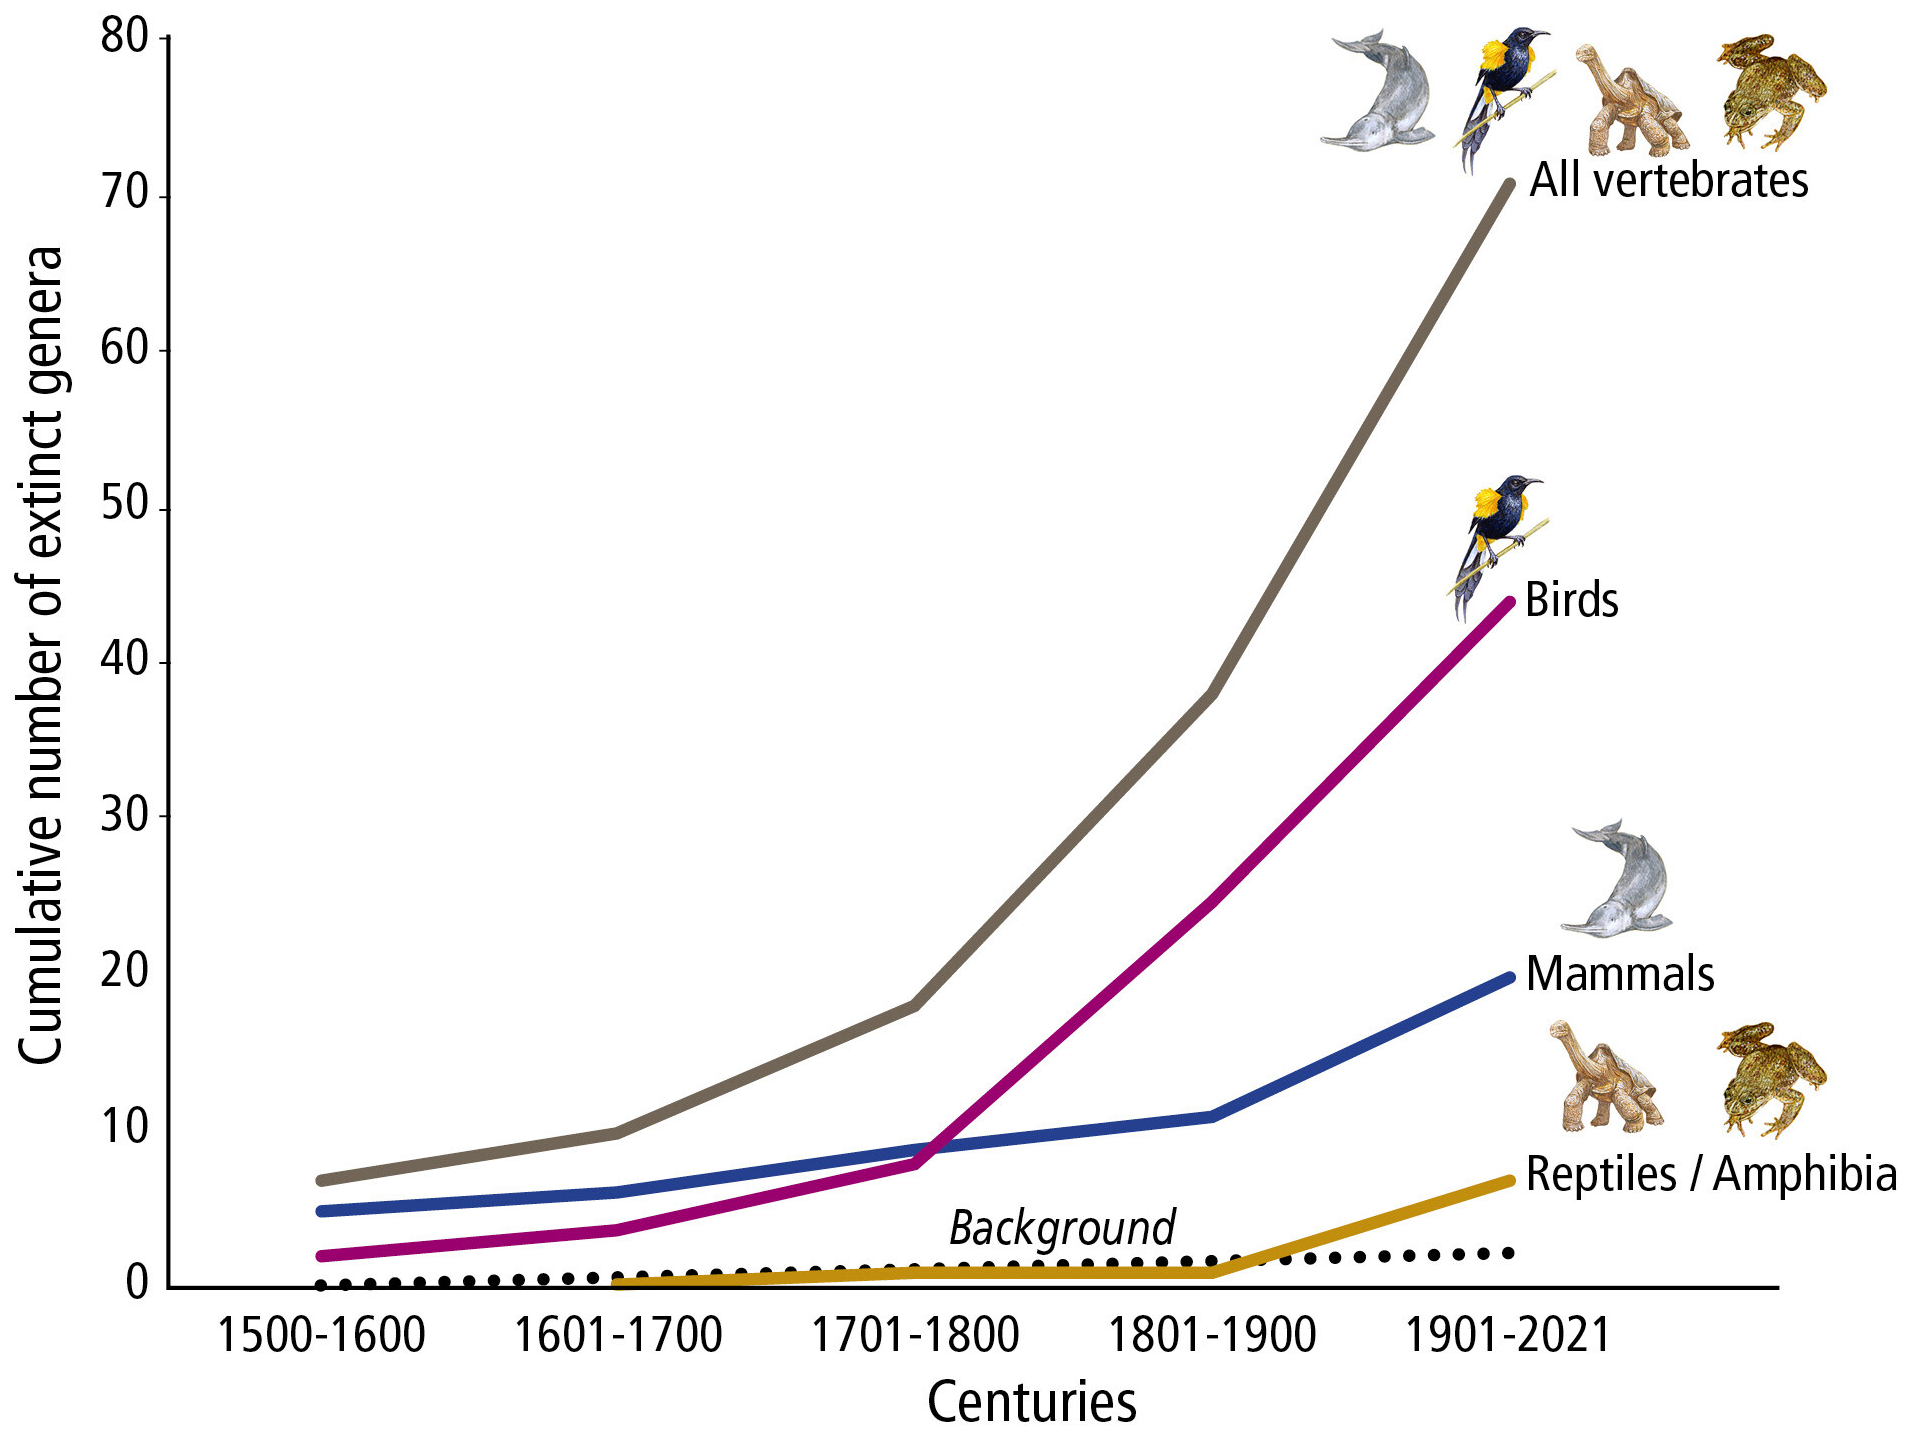 Number of generic extinctions per century among in different classes of vertebrates. The low number of reptiles and amphibia, which underestimate the magnitude of extinction pattern, is probably the result of the lack of information in earlier centuries, where very few species had been described. The dotted line represents the background extinction rate. Graphic: Ceballos and Ehrlich, 2023 / PNAS